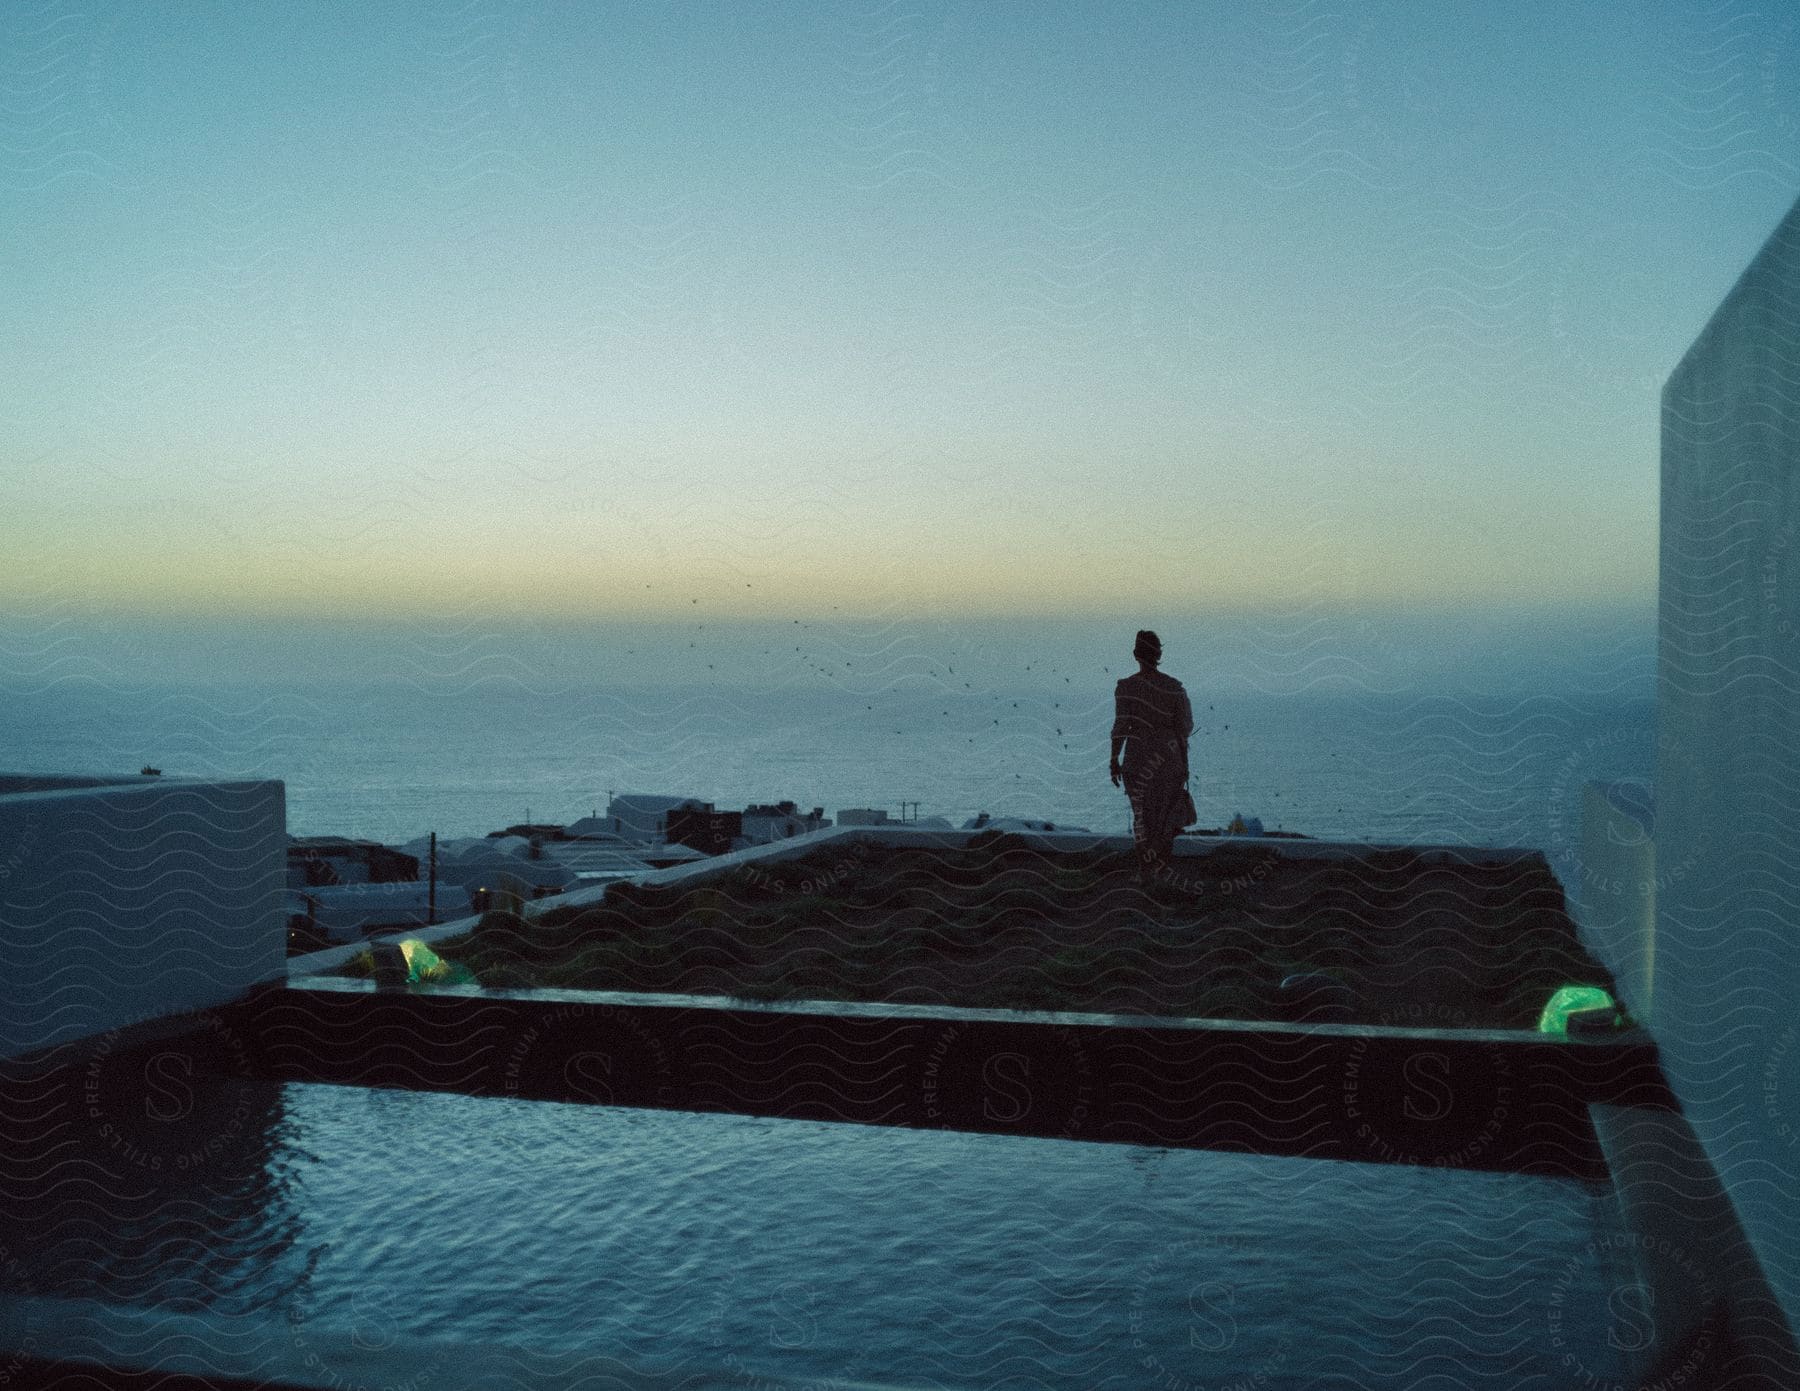 A woman on a rooftop garden beside a modern buildings pool in the dark looking out to the orange horizon